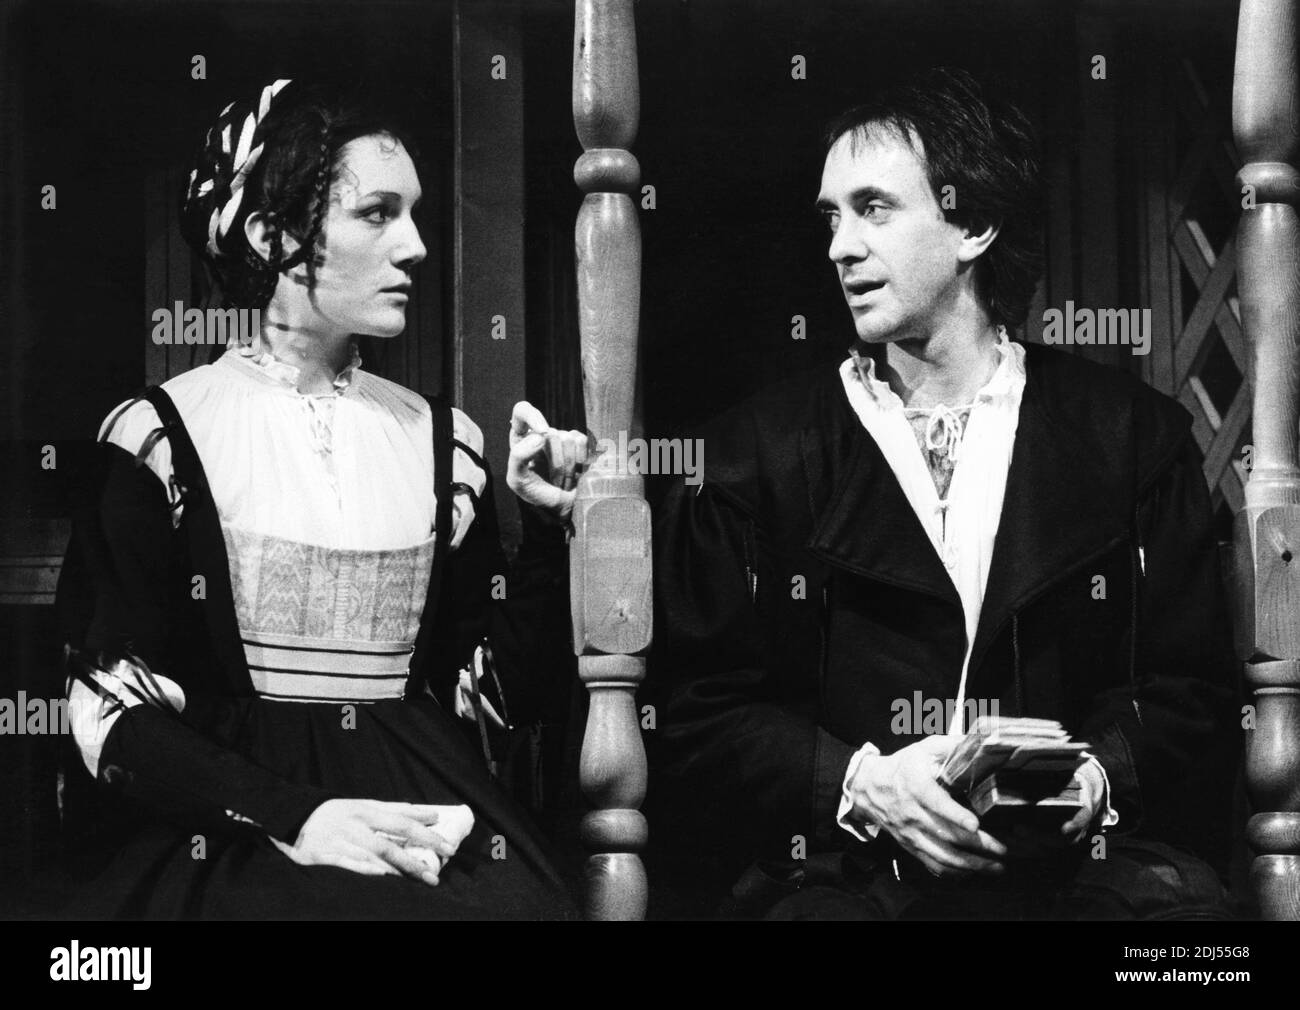 Harriet Walter (Ophelia), Jonathan Pryce (Hamlet) in HAMLET by Shakespeare at the Royal Court Theatre, London  02/04/1980  set design: William Dudley   costumes: Sue Plummer   lighting: Gerry Jenkinson   director: Richard Eyre Stock Photo